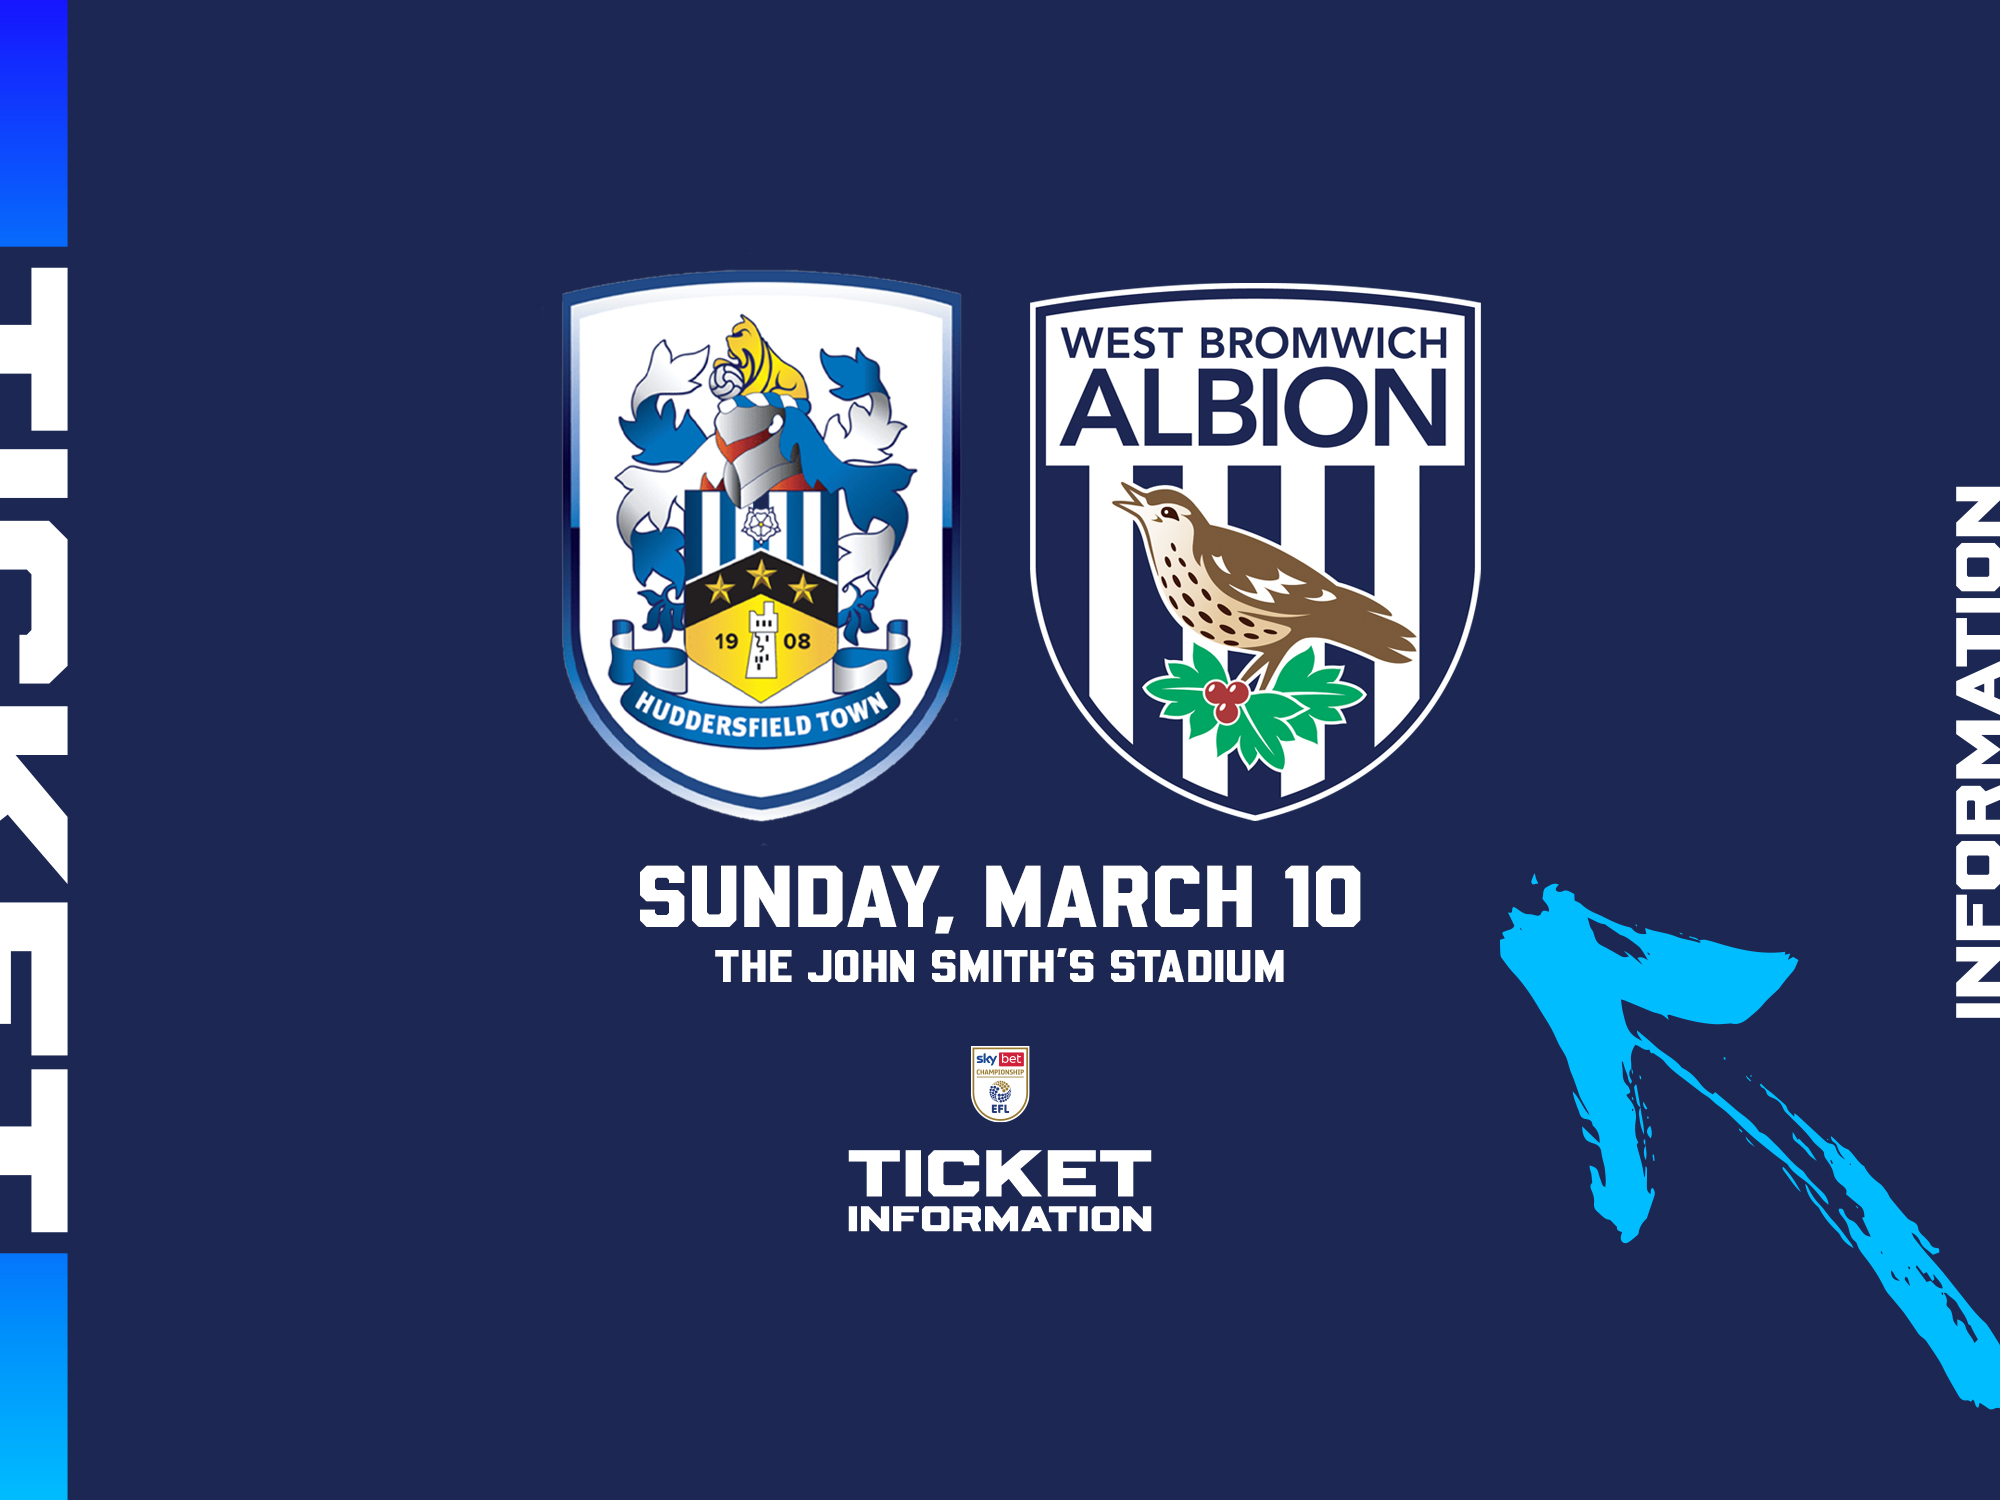 A ticket graphic displaying information for Albion's game against Huddersfield